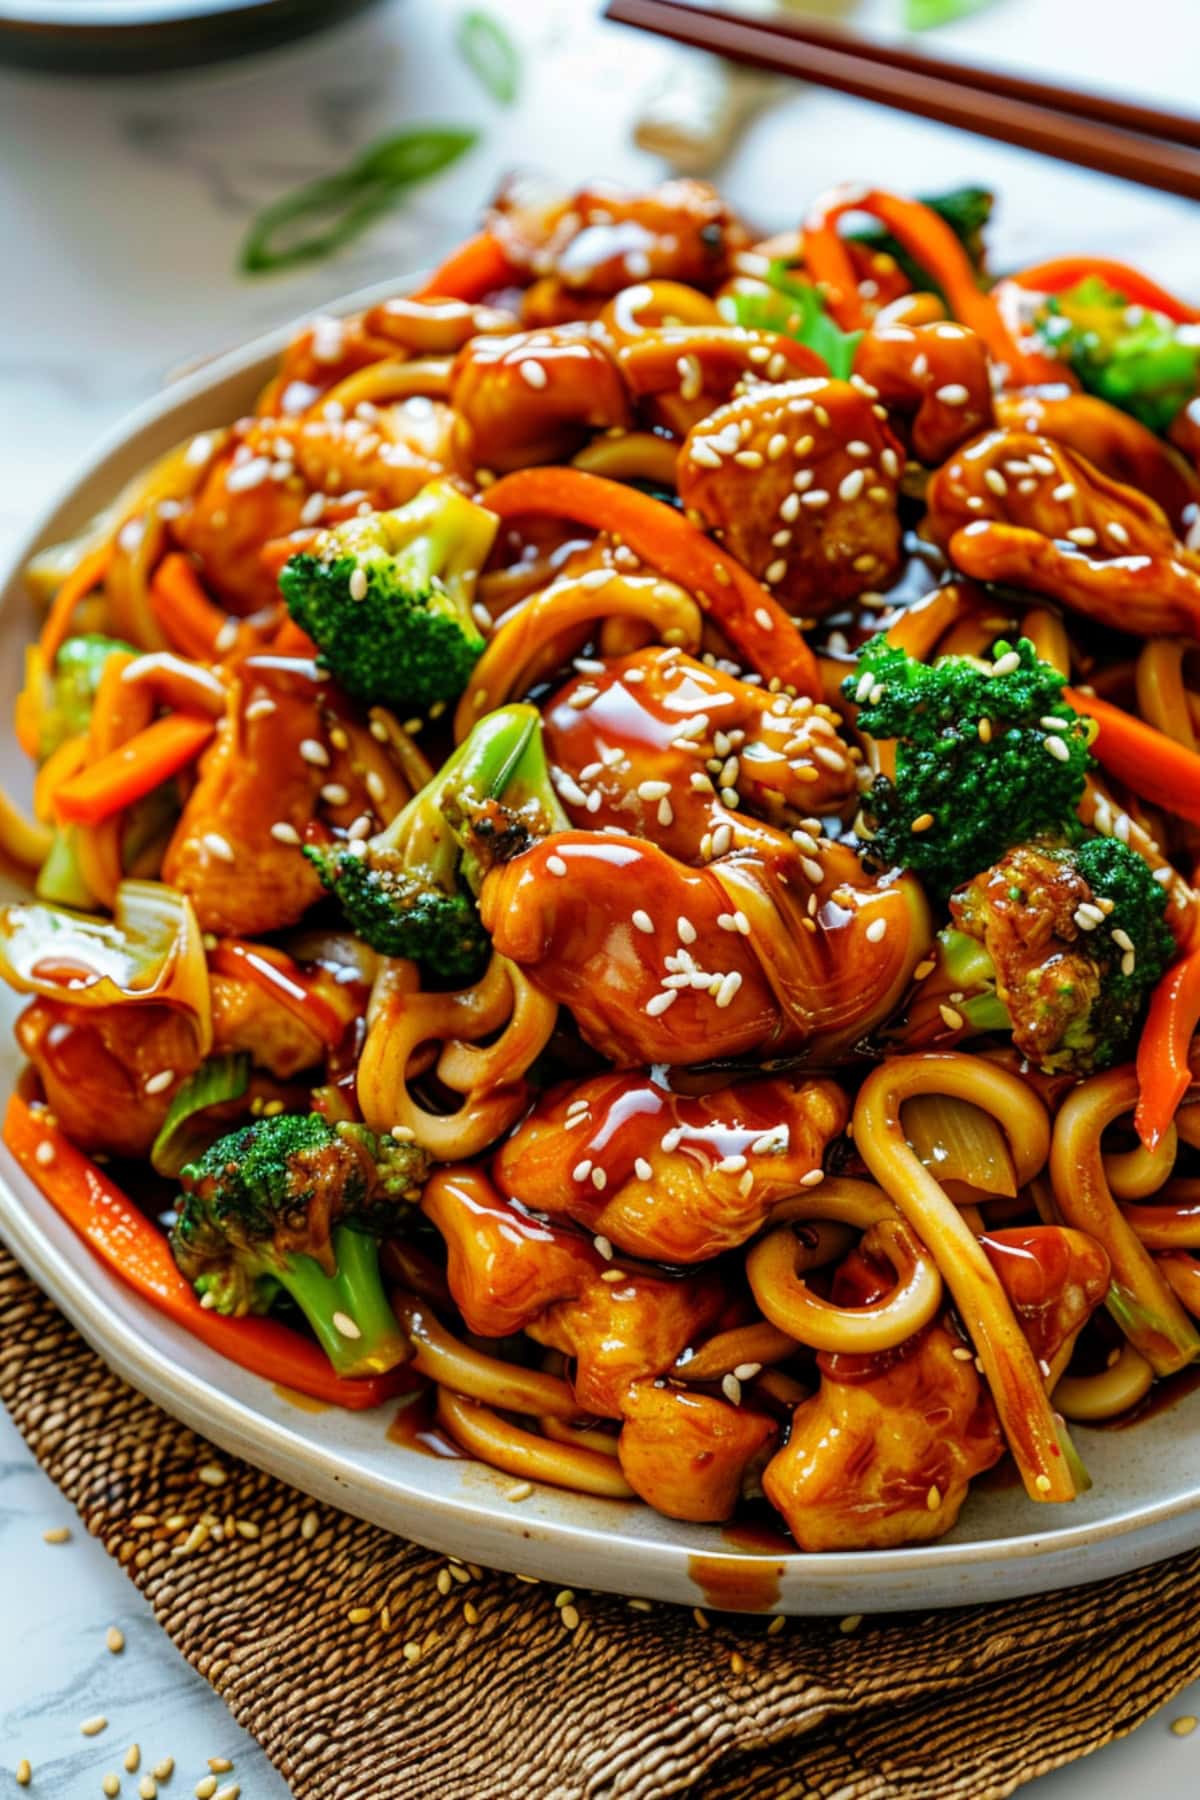 Chicken teriyaki noodles served in a plate garnished with sesame seeds.